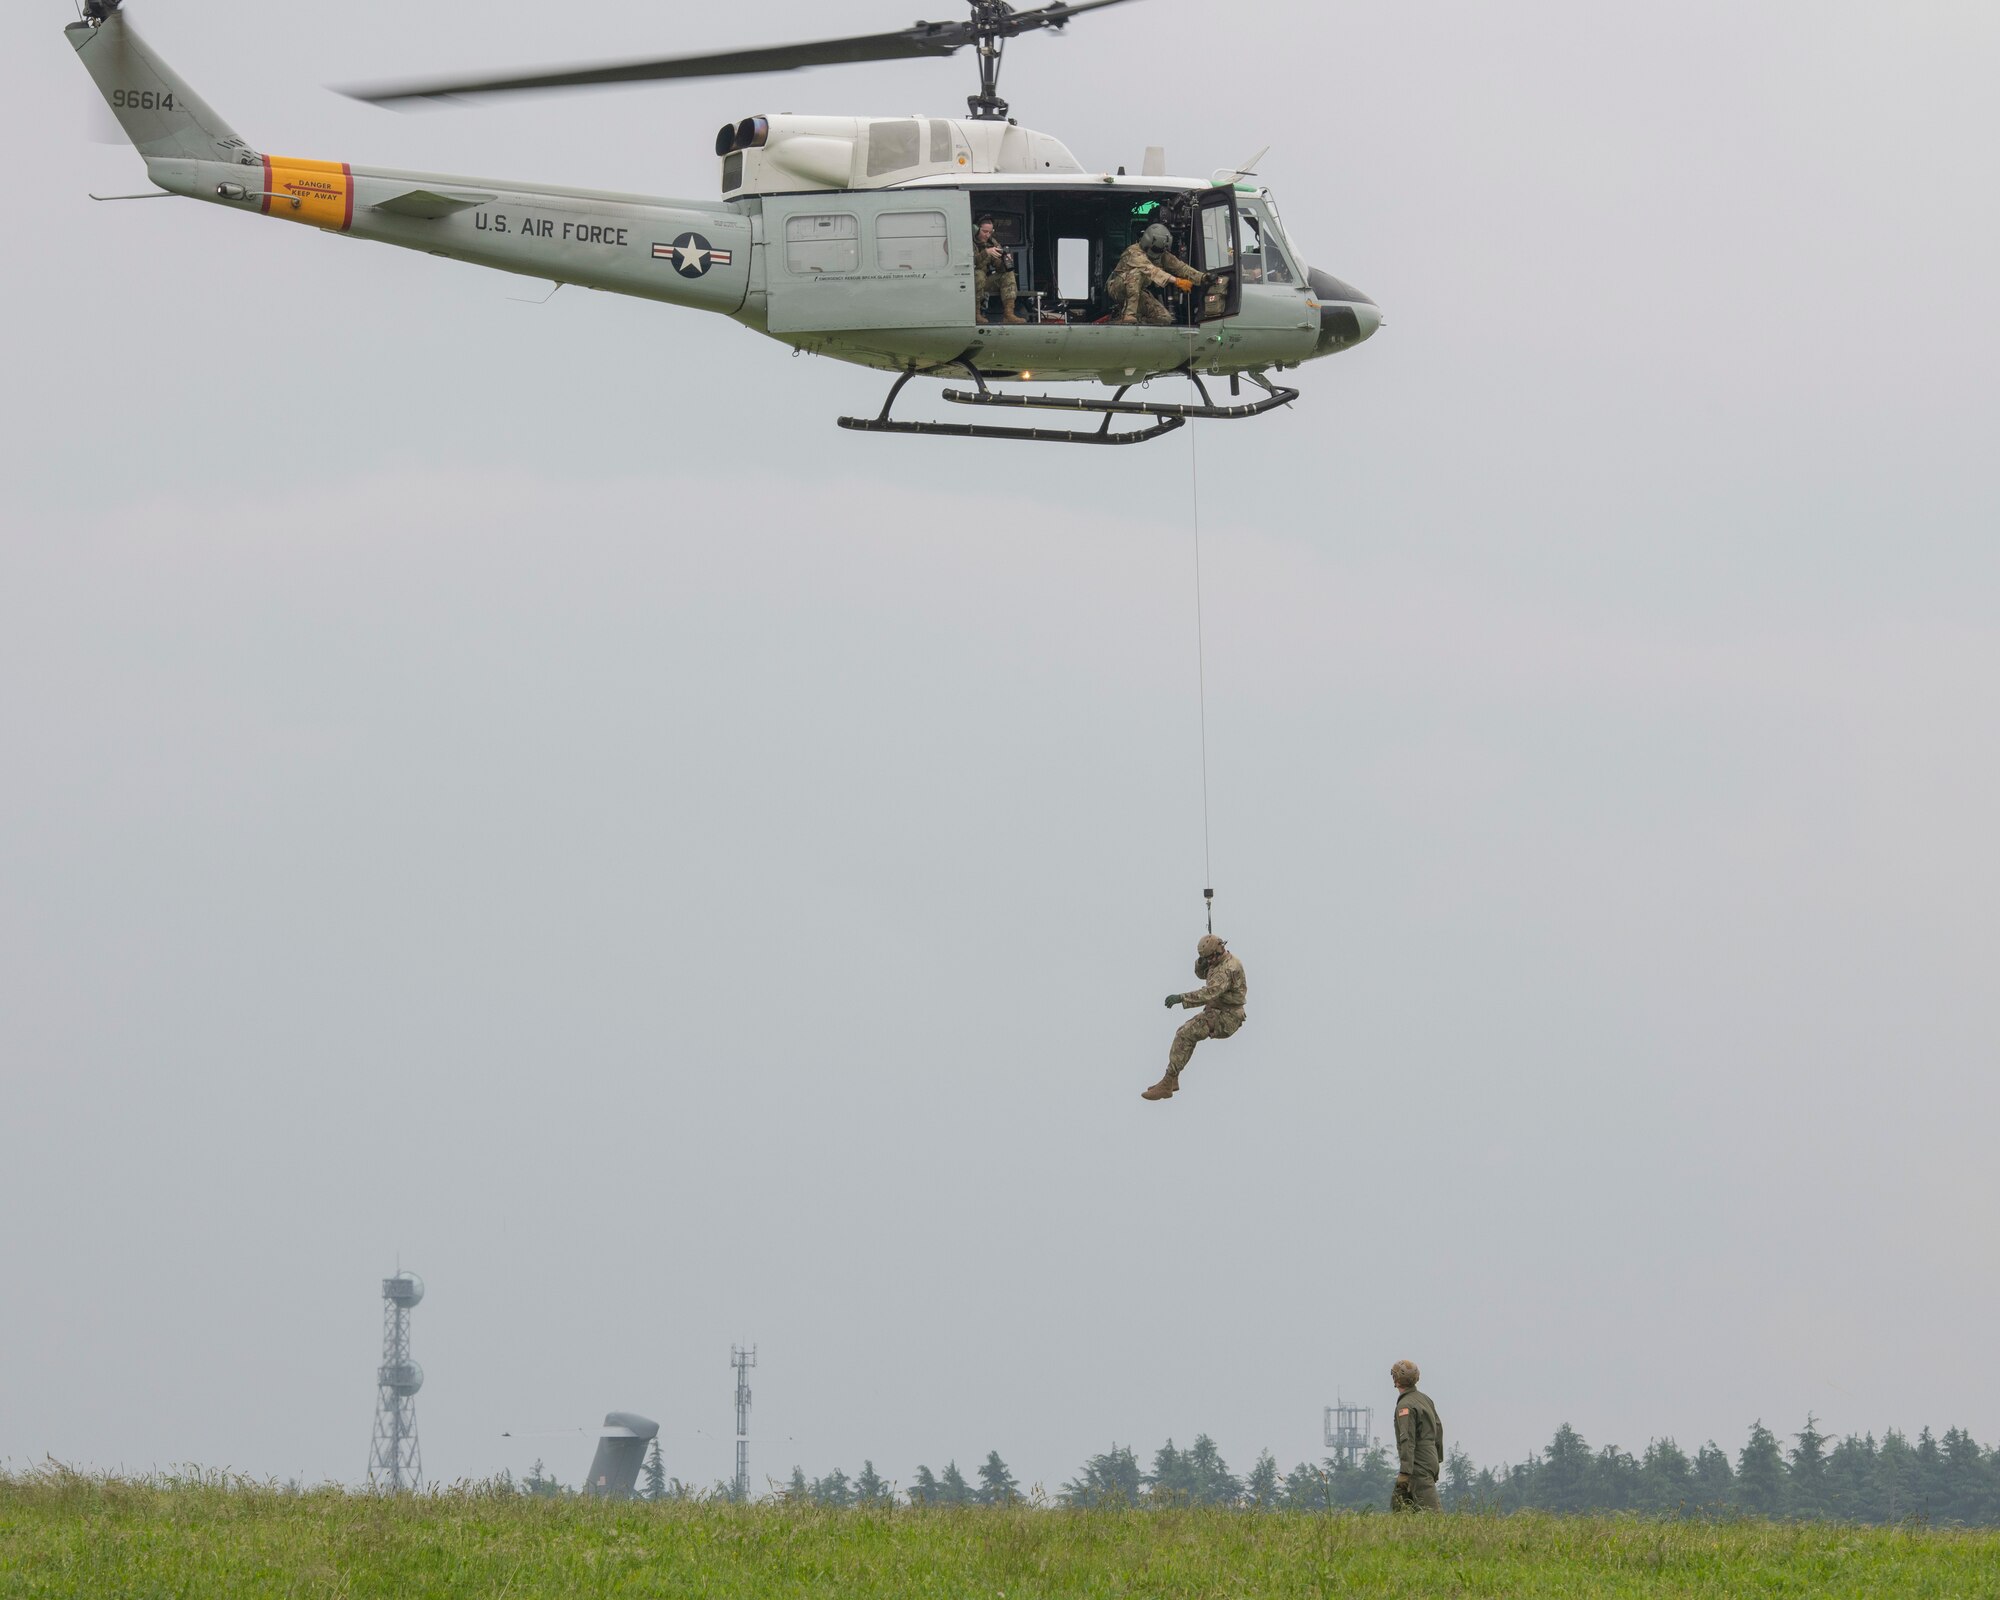 Staff Sgt. Zach Webster, 459th Airlift Squadron special missions aviator, is hoisted into a UH-1N Iroquois during Friendship Festival 2022, at Yokota Air Base, Japan, May 21. The demonstration was one of many events during the weekend that showcased U.S. military capabilities. (U.S. Air Force photo by Machiko Arita)